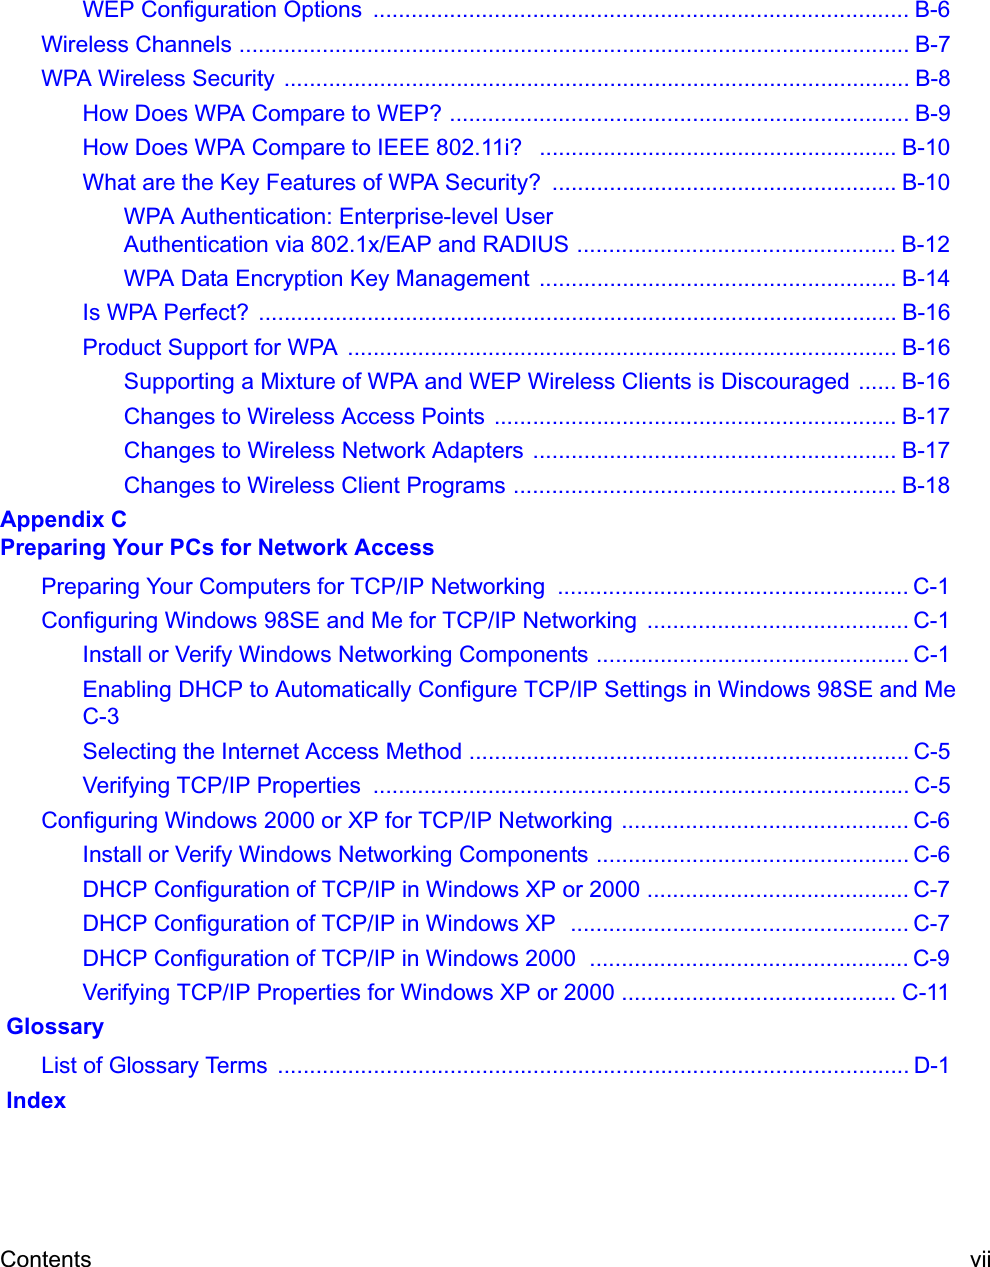 Contents viiWEP Configuration Options  .................................................................................... B-6Wireless Channels ......................................................................................................... B-7WPA Wireless Security  .................................................................................................. B-8How Does WPA Compare to WEP? ........................................................................ B-9How Does WPA Compare to IEEE 802.11i?   ........................................................ B-10What are the Key Features of WPA Security?  ...................................................... B-10WPA Authentication: Enterprise-level User Authentication via 802.1x/EAP and RADIUS .................................................. B-12WPA Data Encryption Key Management  ........................................................ B-14Is WPA Perfect?  .................................................................................................... B-16Product Support for WPA  ...................................................................................... B-16Supporting a Mixture of WPA and WEP Wireless Clients is Discouraged ...... B-16Changes to Wireless Access Points ............................................................... B-17Changes to Wireless Network Adapters  ......................................................... B-17Changes to Wireless Client Programs ............................................................ B-18Appendix C Preparing Your PCs for Network AccessPreparing Your Computers for TCP/IP Networking  ....................................................... C-1Configuring Windows 98SE and Me for TCP/IP Networking  ......................................... C-1Install or Verify Windows Networking Components ................................................. C-1Enabling DHCP to Automatically Configure TCP/IP Settings in Windows 98SE and Me C-3Selecting the Internet Access Method ..................................................................... C-5Verifying TCP/IP Properties  .................................................................................... C-5Configuring Windows 2000 or XP for TCP/IP Networking ............................................. C-6Install or Verify Windows Networking Components ................................................. C-6DHCP Configuration of TCP/IP in Windows XP or 2000 ......................................... C-7DHCP Configuration of TCP/IP in Windows XP  ..................................................... C-7DHCP Configuration of TCP/IP in Windows 2000  .................................................. C-9Verifying TCP/IP Properties for Windows XP or 2000 ........................................... C-11 GlossaryList of Glossary Terms  ................................................................................................... D-1 Index